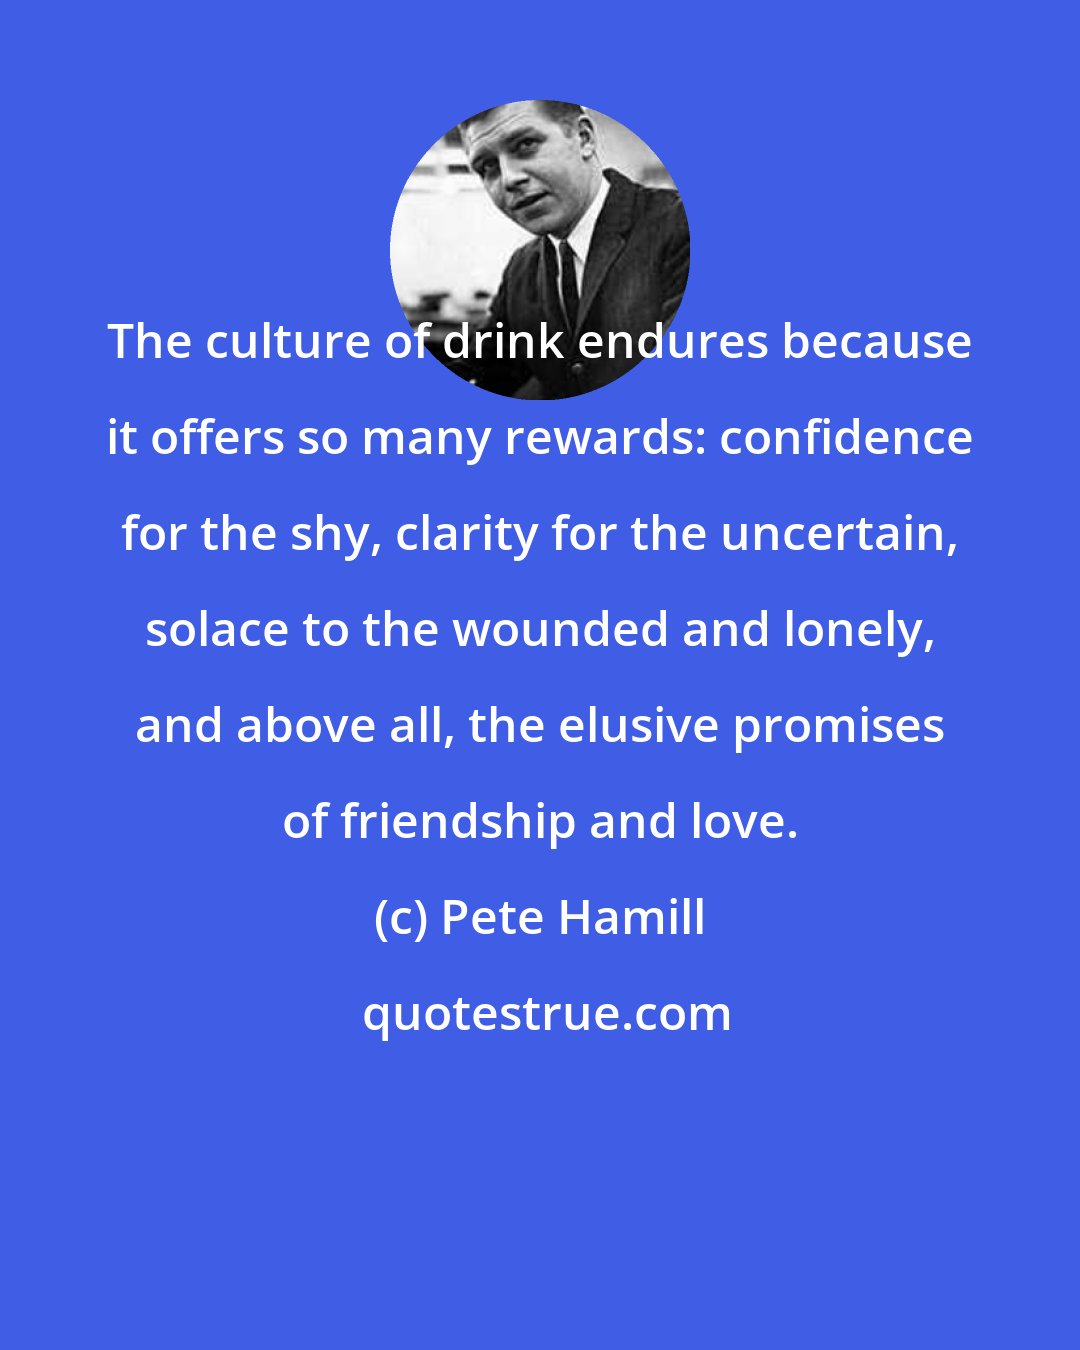 Pete Hamill: The culture of drink endures because it offers so many rewards: confidence for the shy, clarity for the uncertain, solace to the wounded and lonely, and above all, the elusive promises of friendship and love.